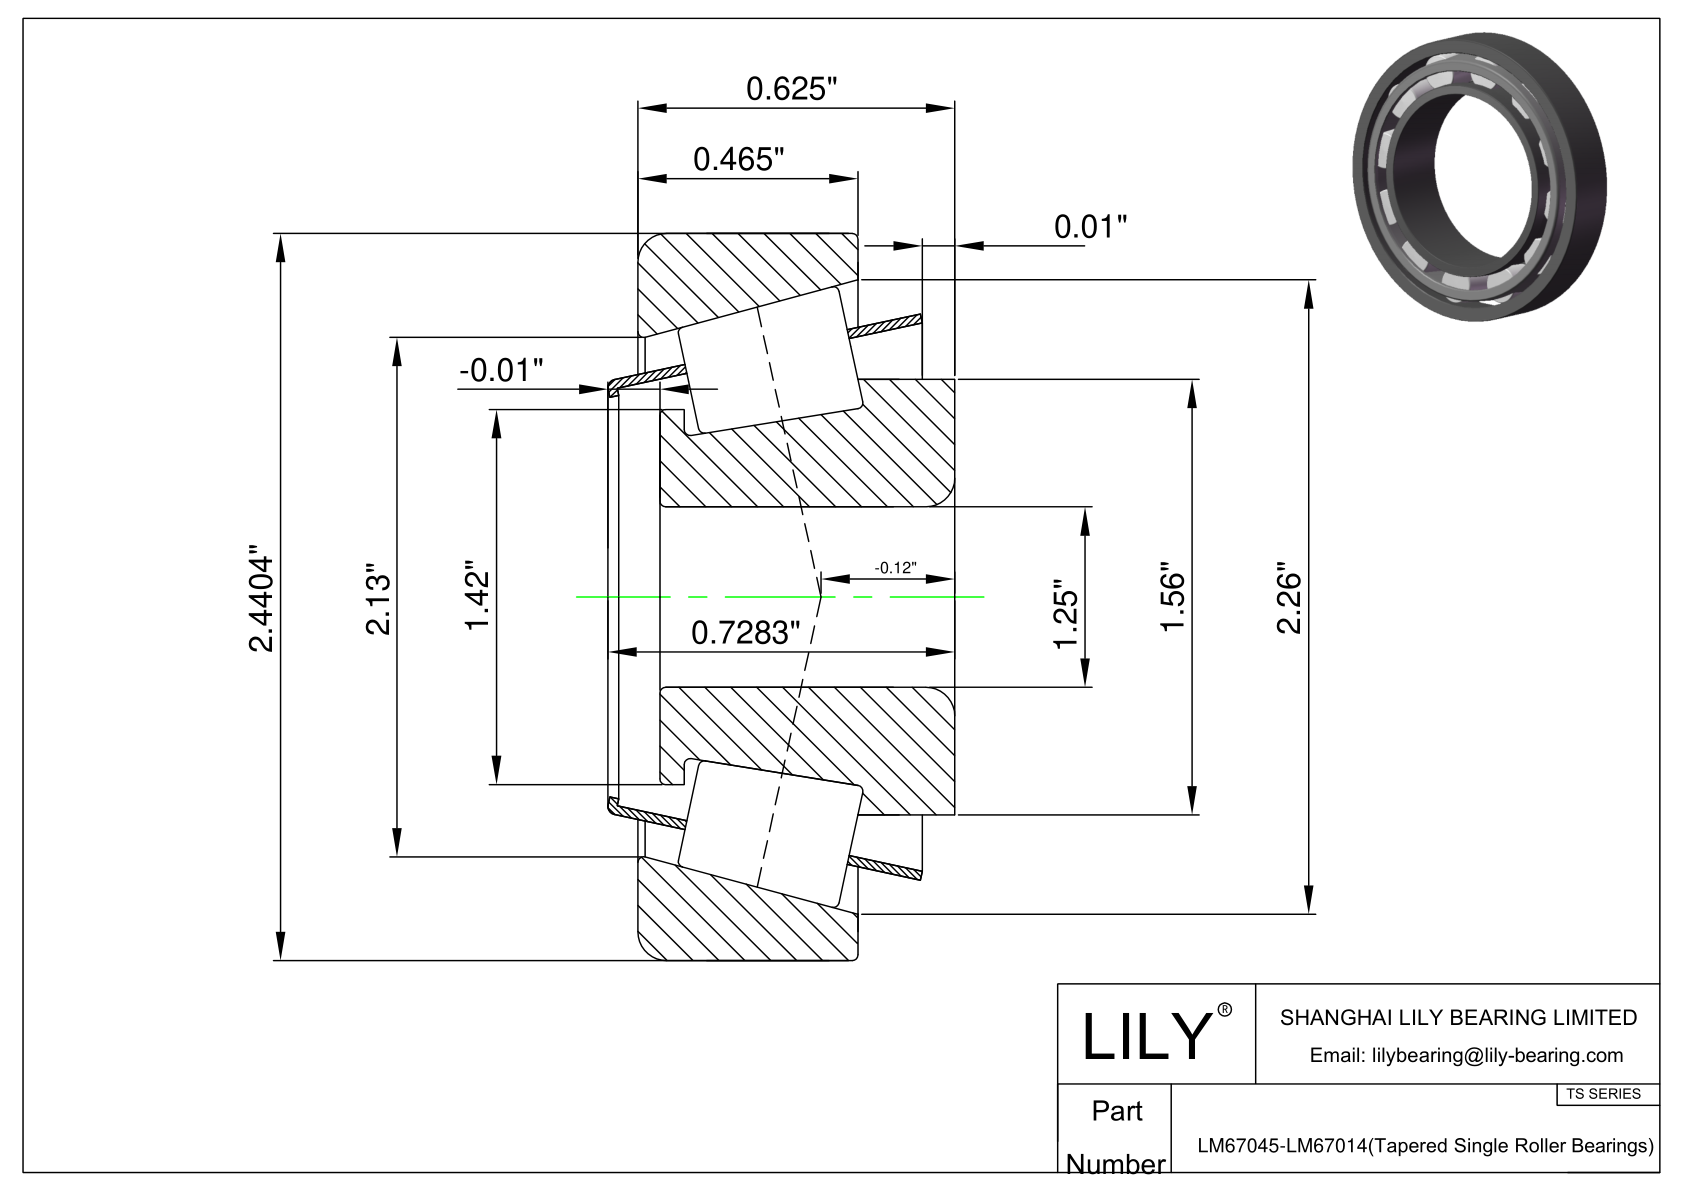 LM67045-LM67014 TS (Tapered Single Roller Bearings) (Imperial) cad drawing